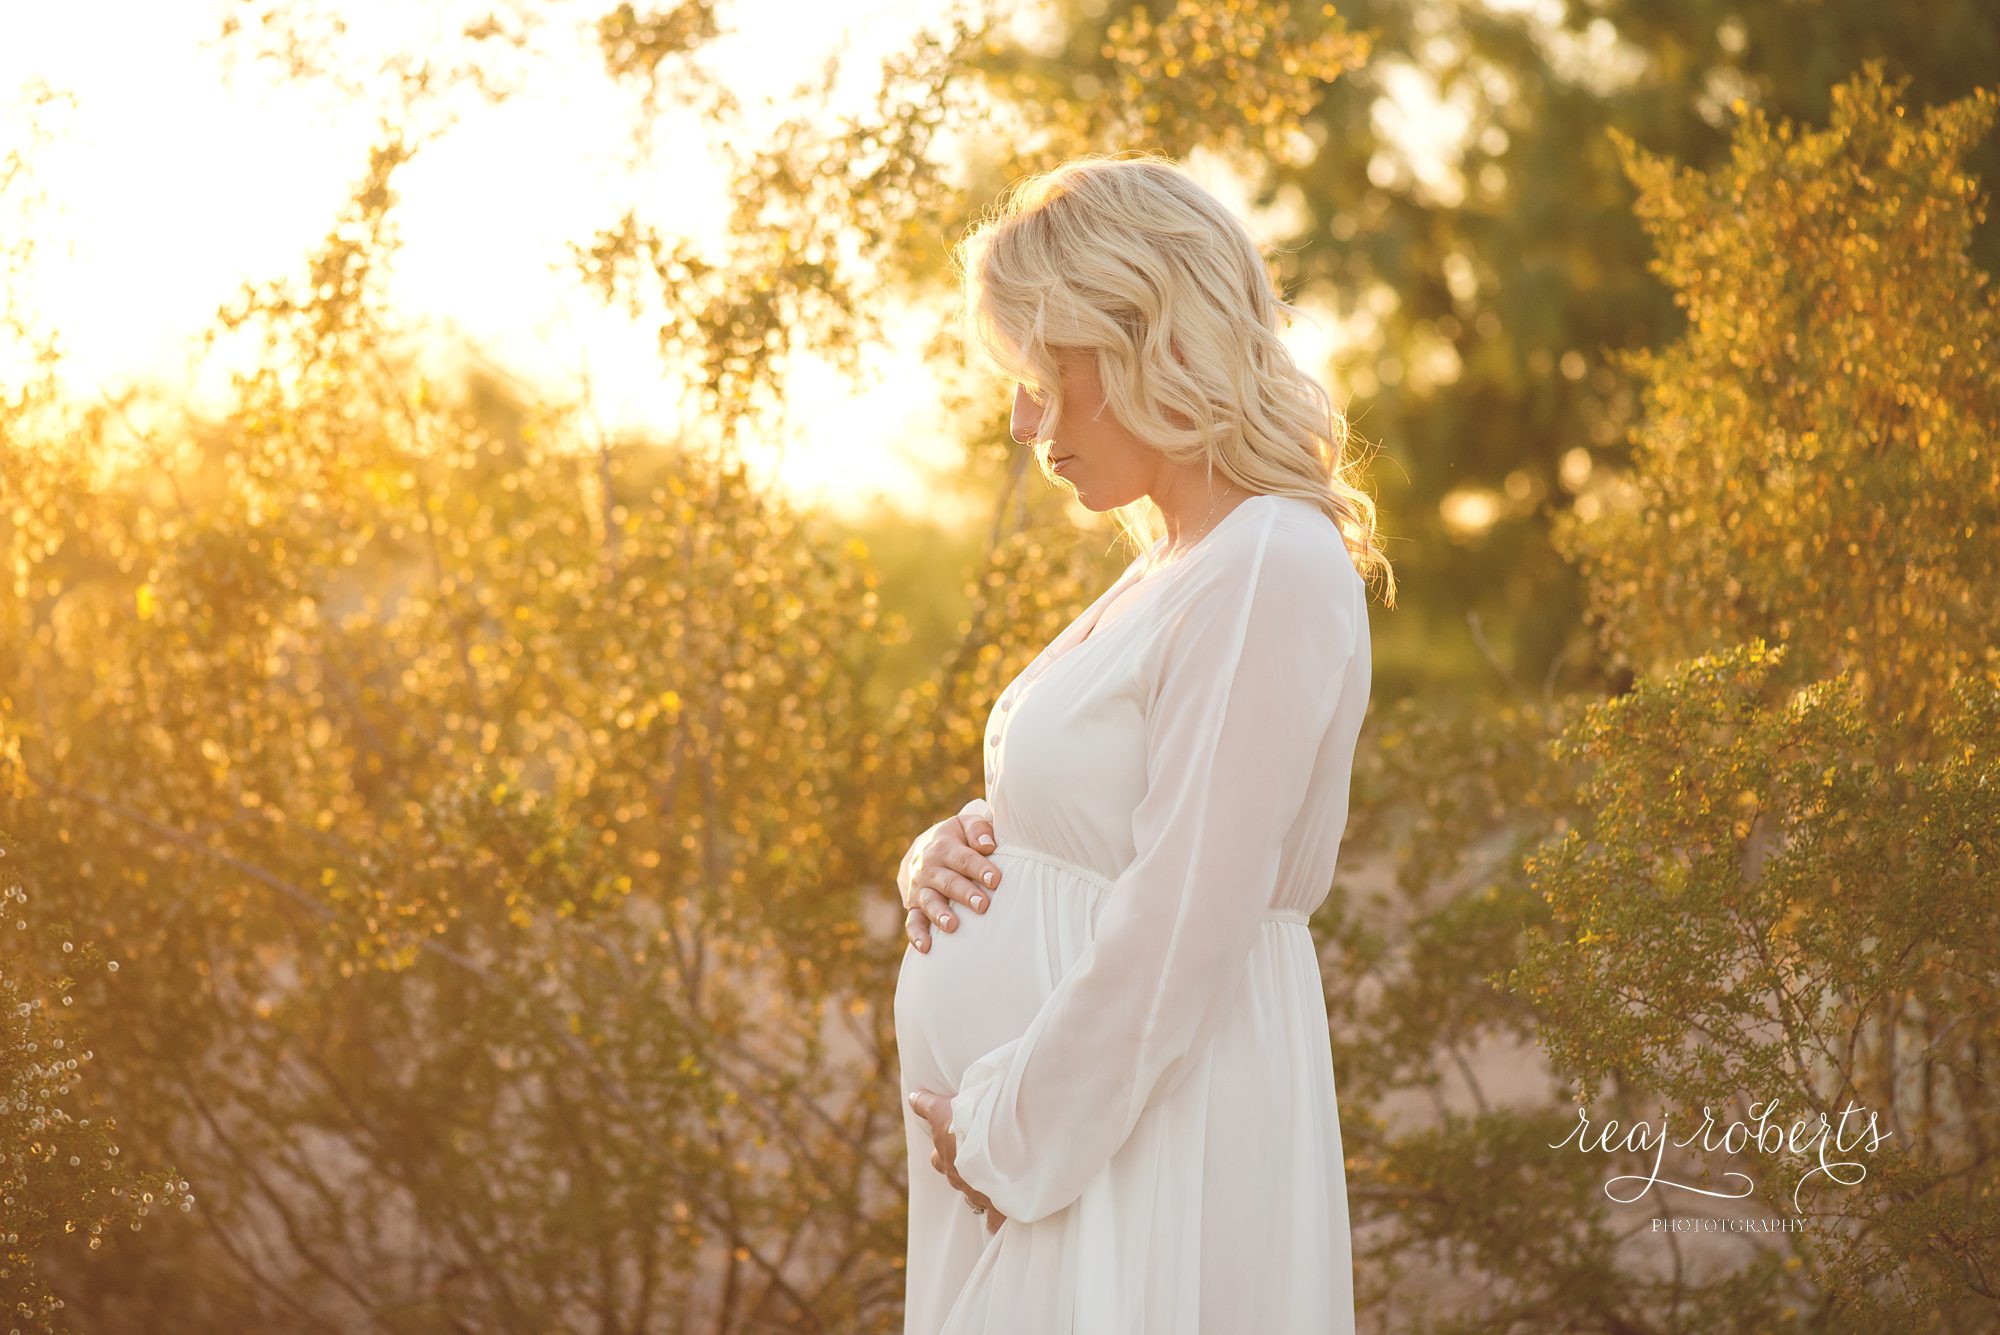 maternity pictures desert sunset | Reaj Roberts Photography